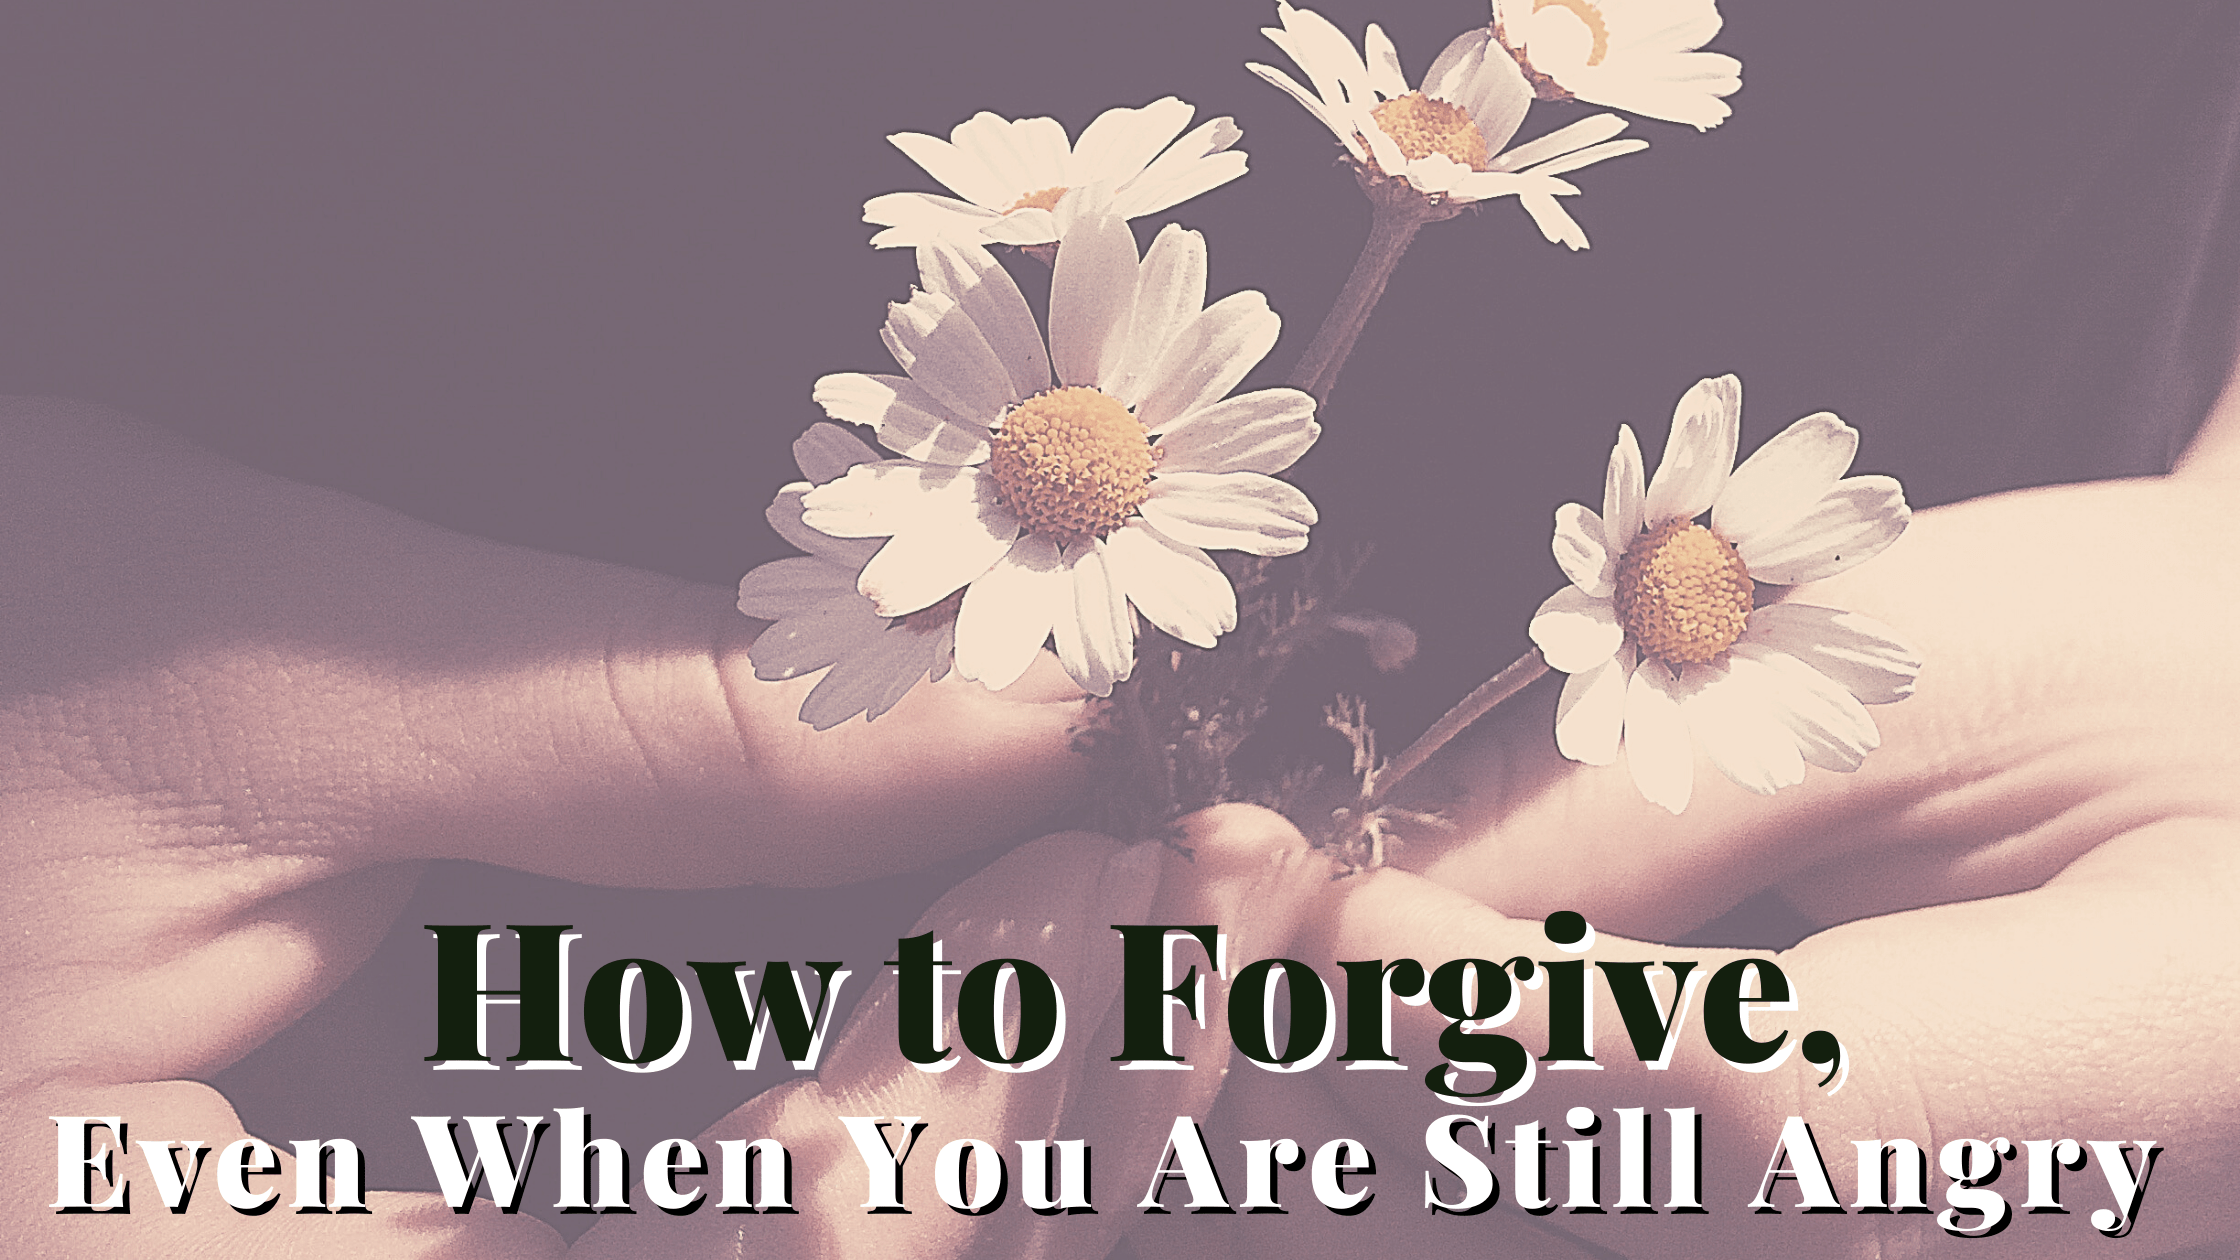 hands holding white daisies how to forgive even when you are still angry